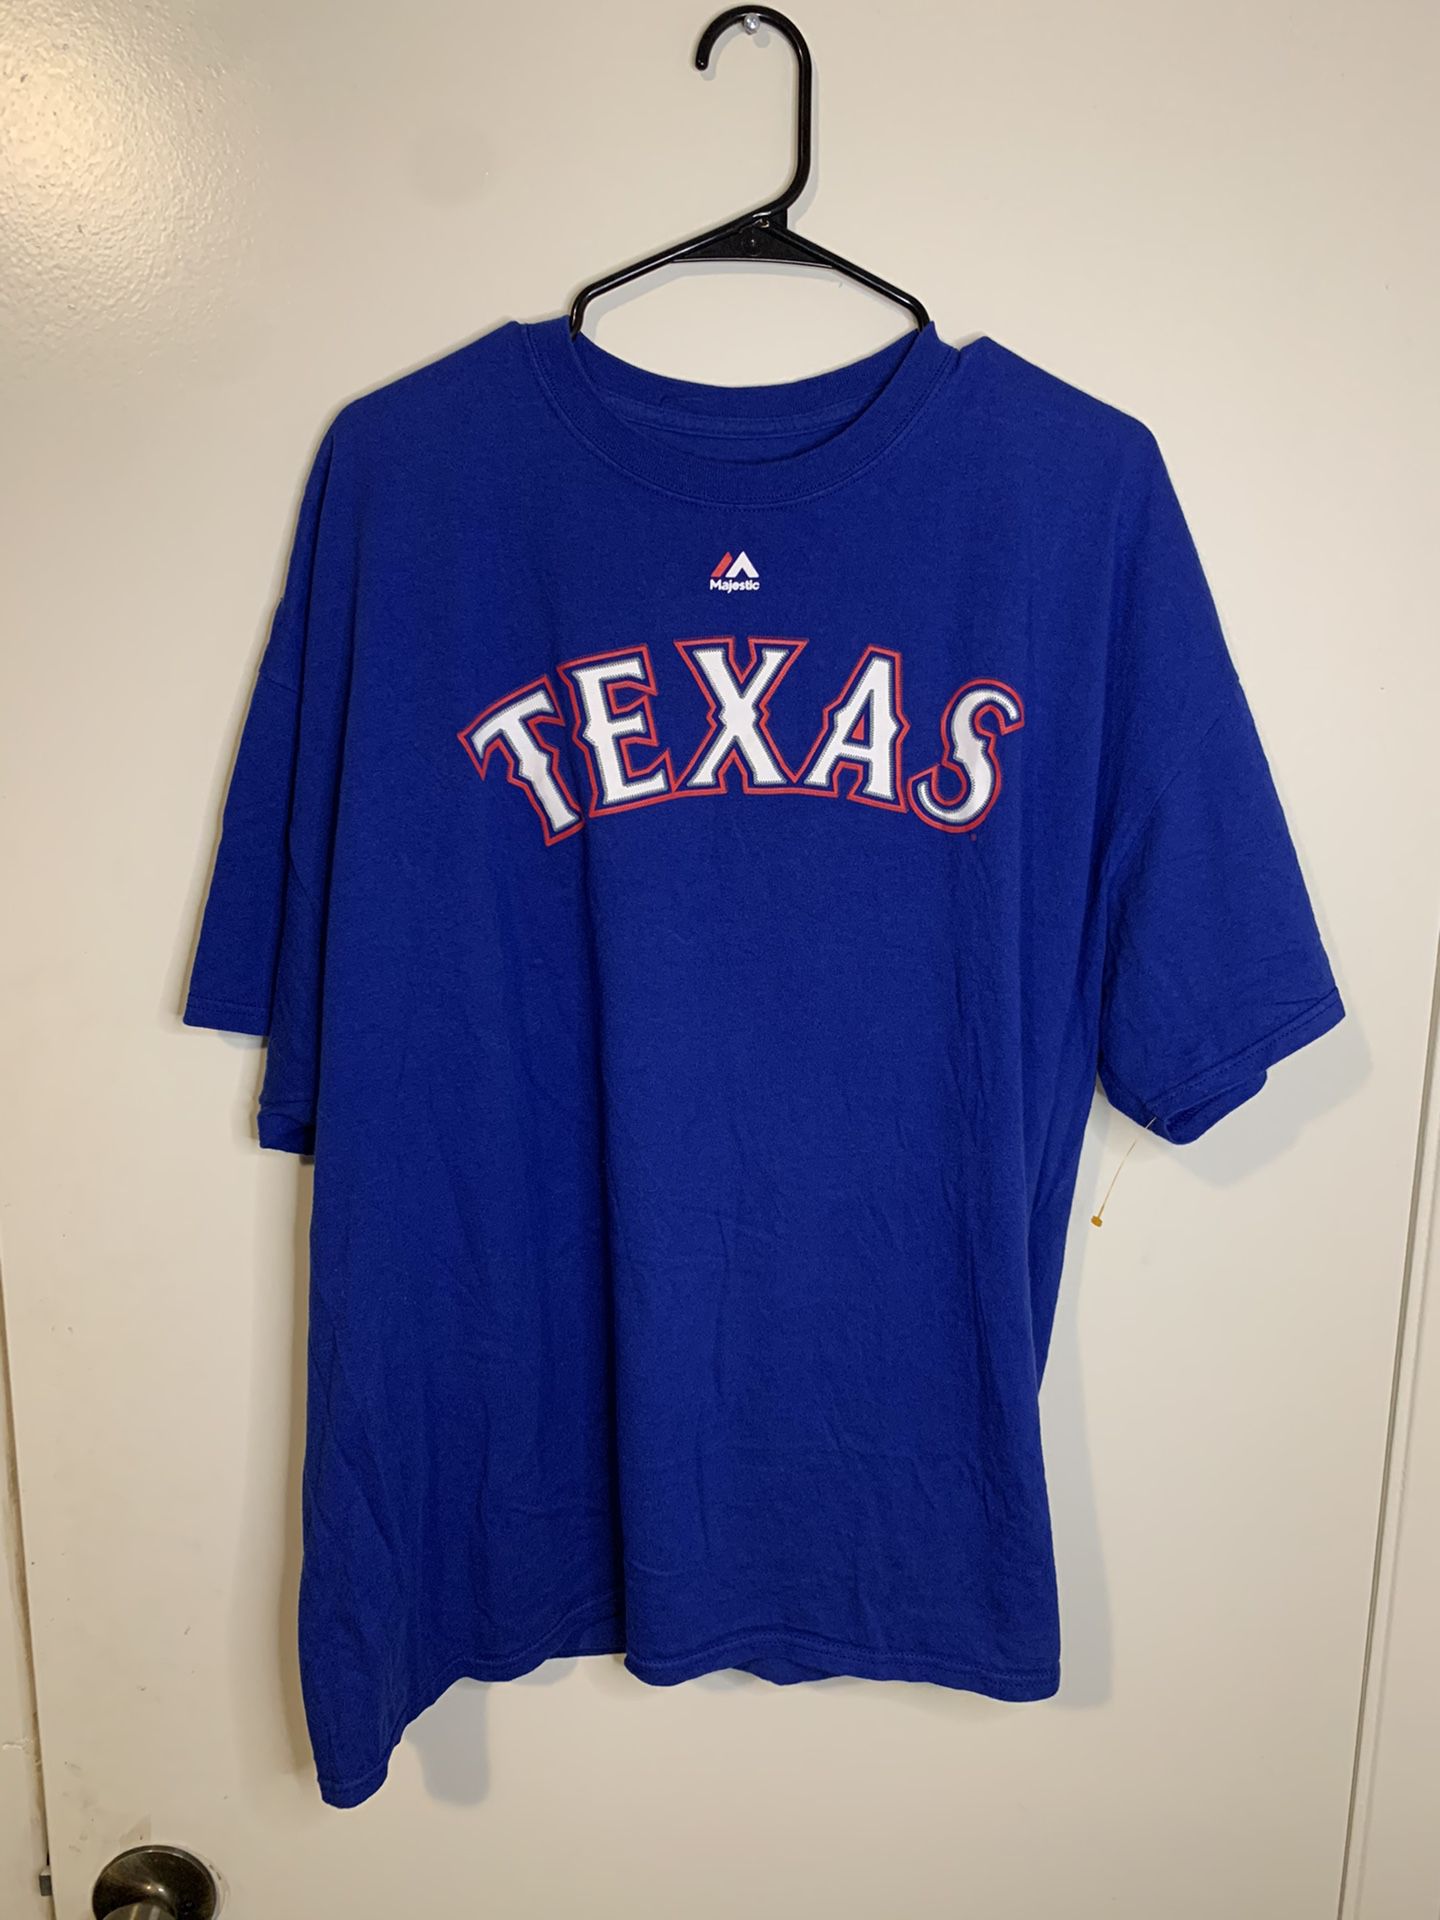 Texas Rangers Official Majestic T Shirt Blue for Sale in Irving, TX -  OfferUp